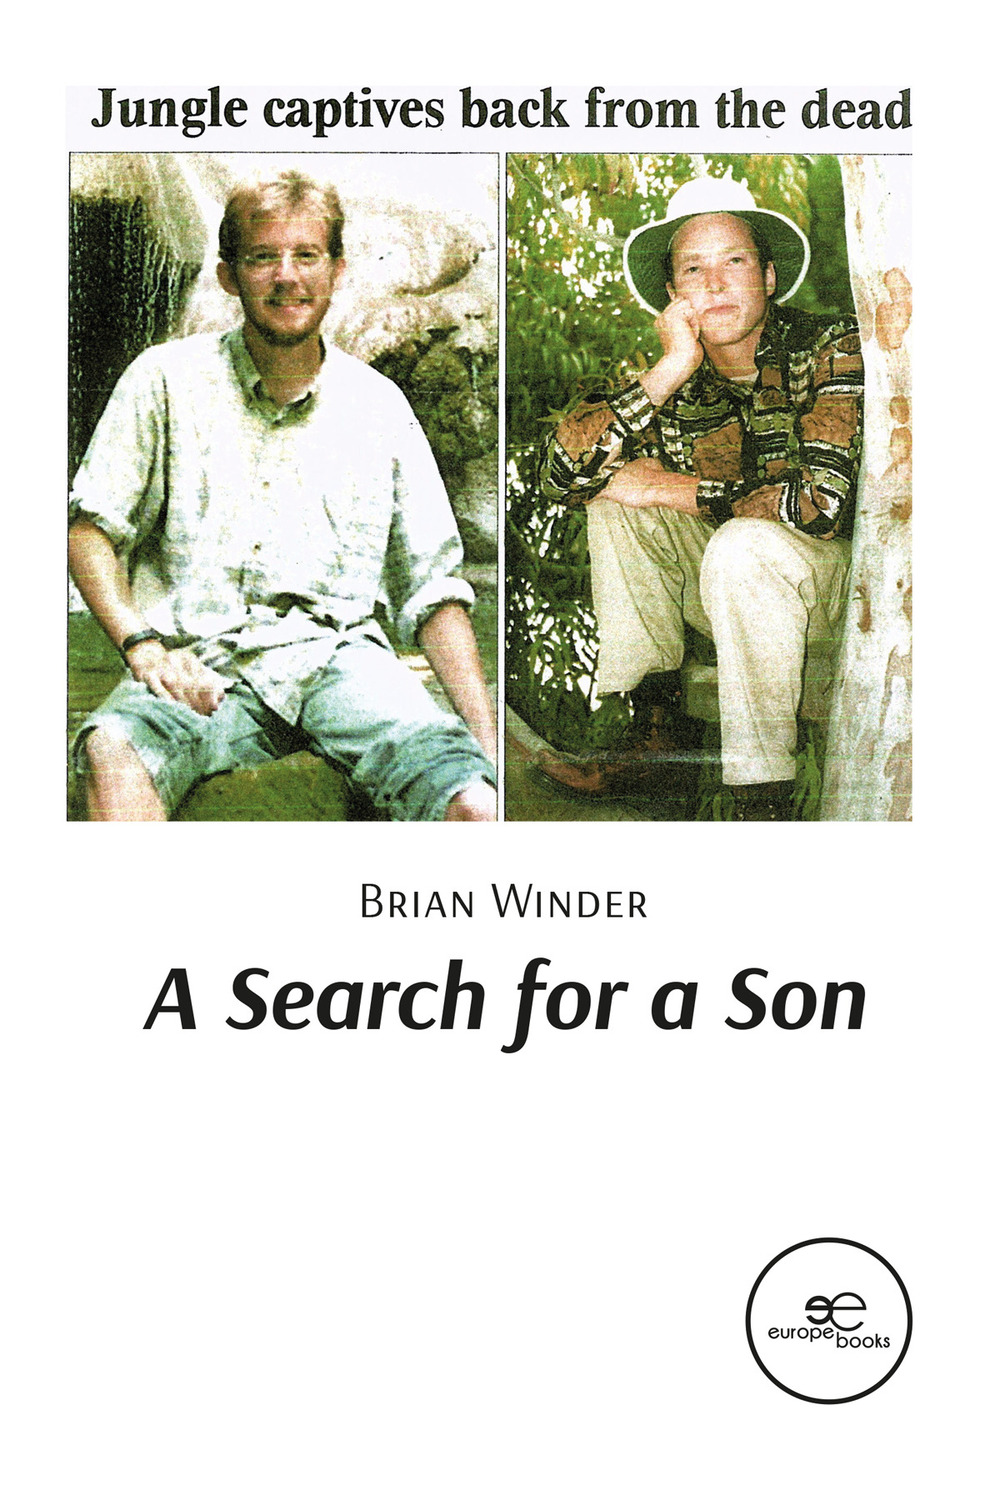 A search for a son